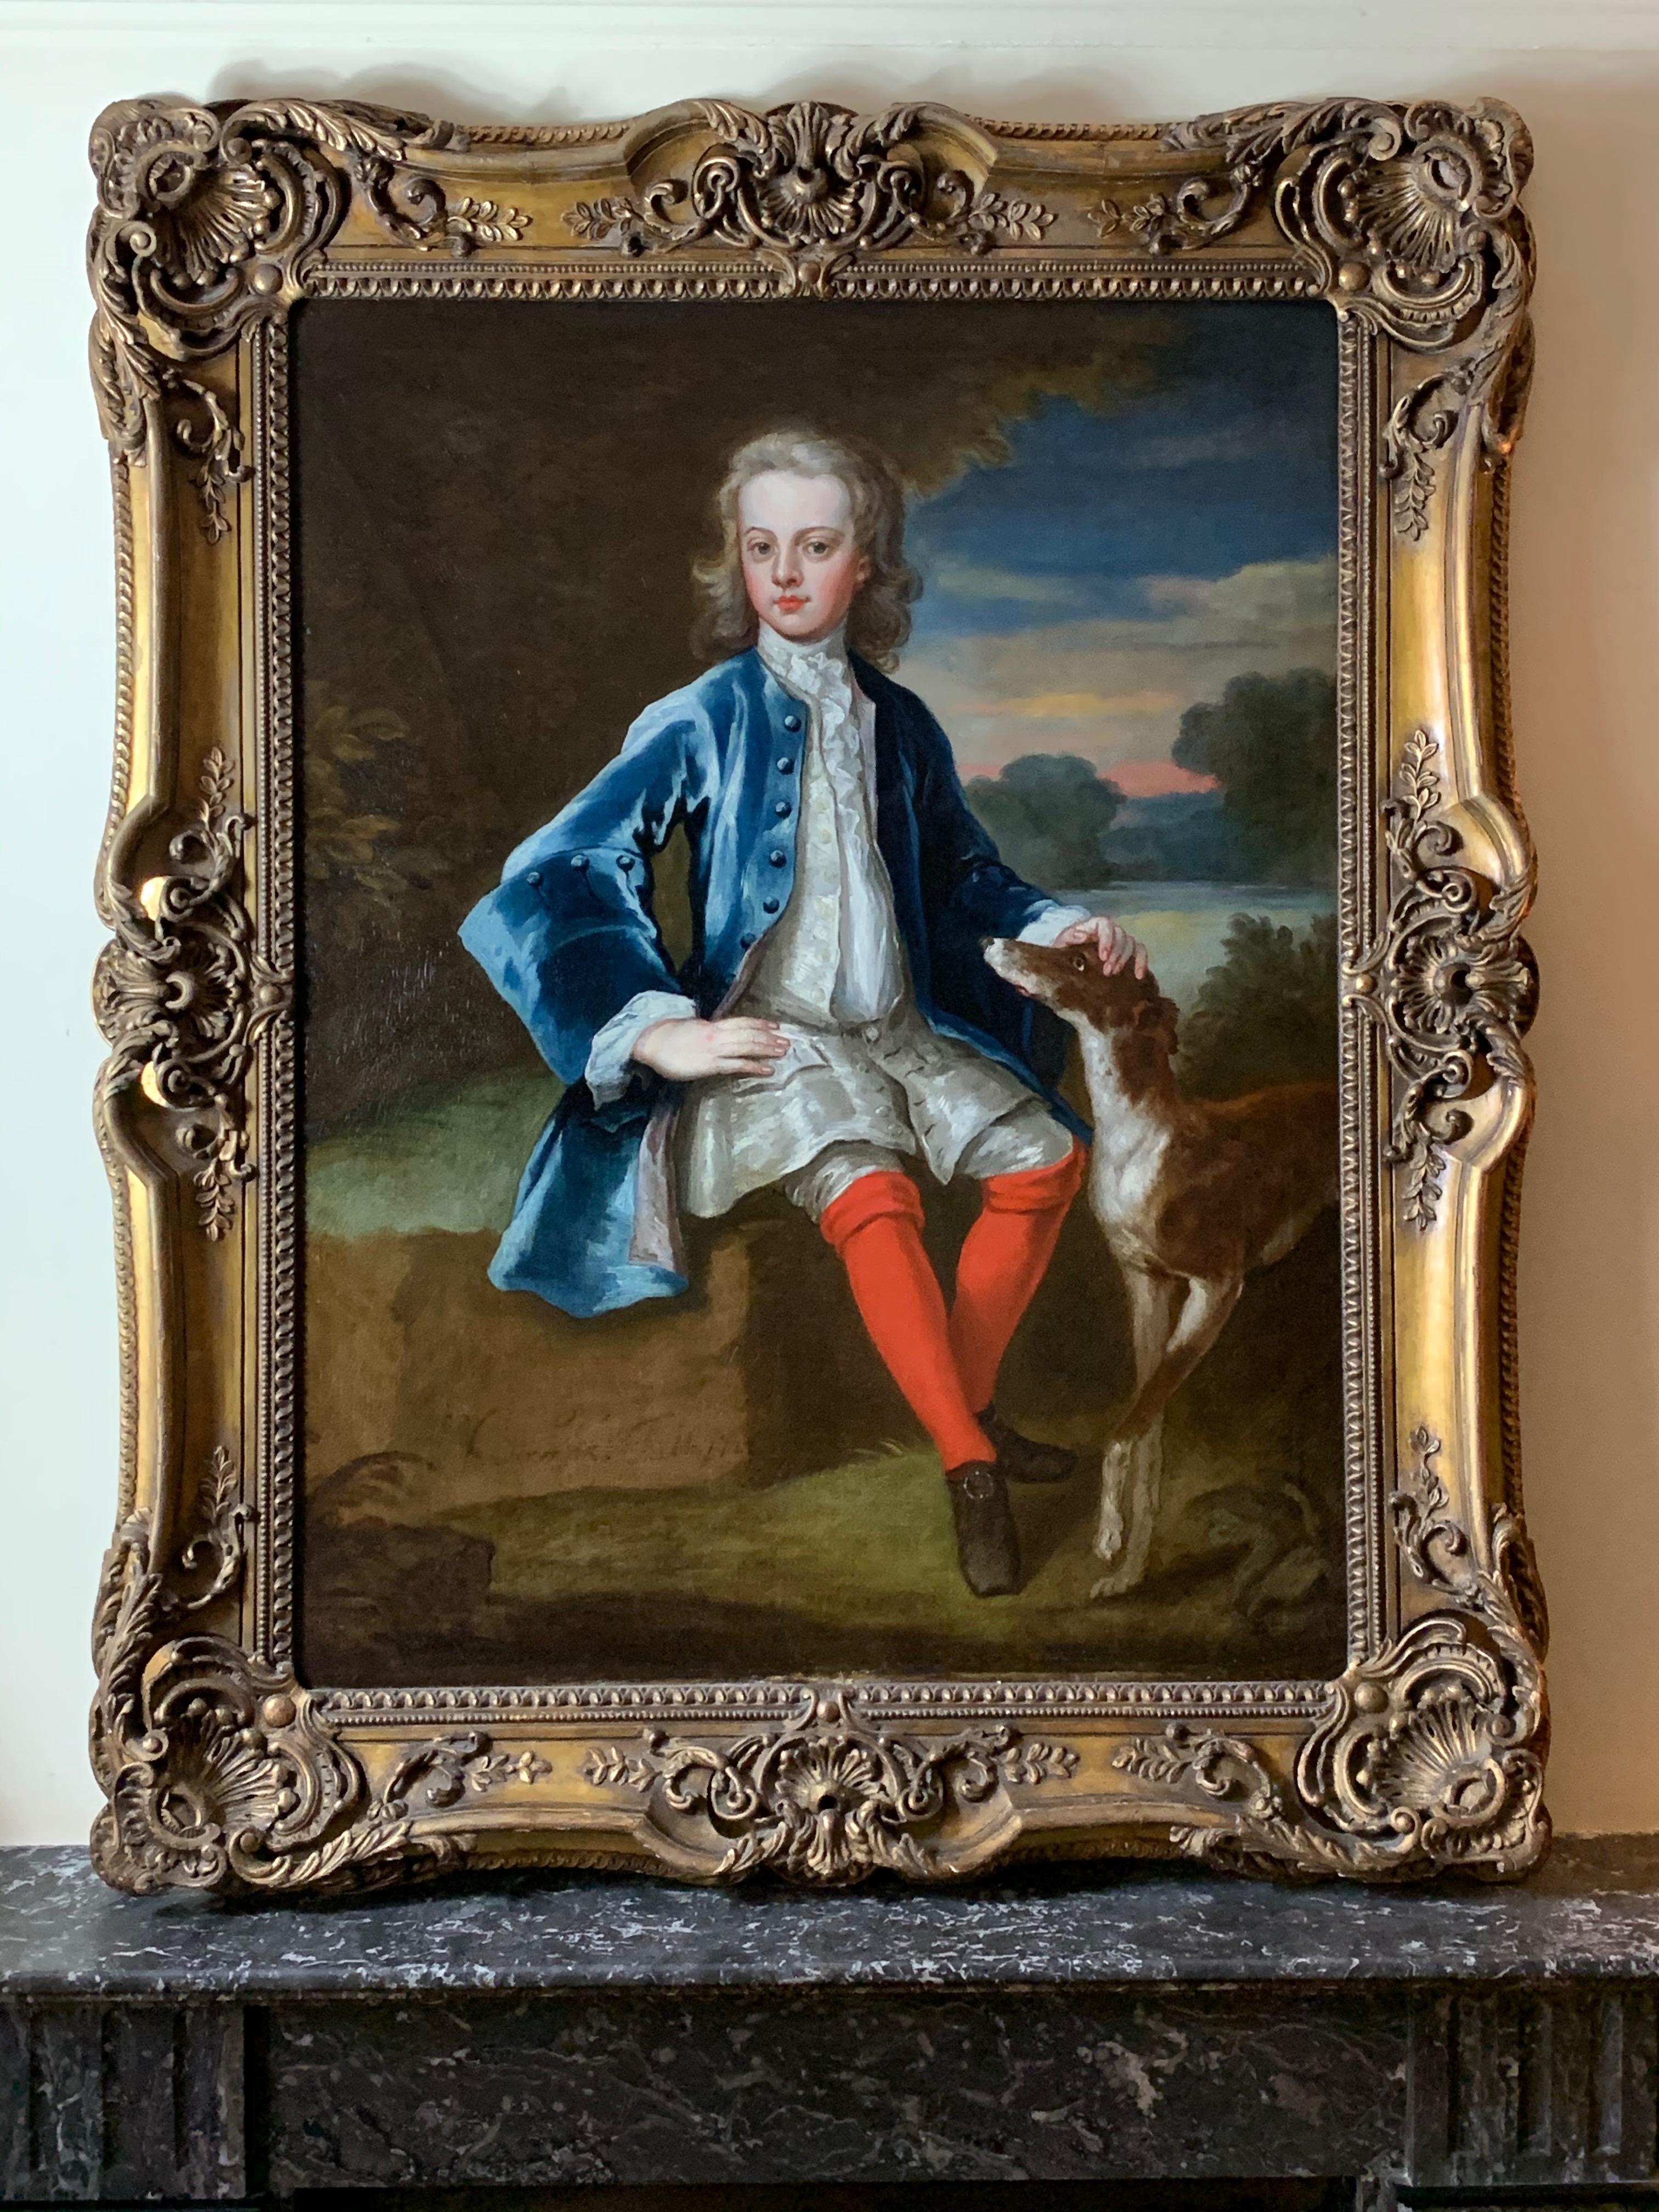 A charming and and highly decorative early 18th Century English portrait of an elegant young gentleman and his greyhound, within  an extensive landscape. Signed by the artist ‘John Vanderbank 1726’.

The attractive sitter is pictured full length